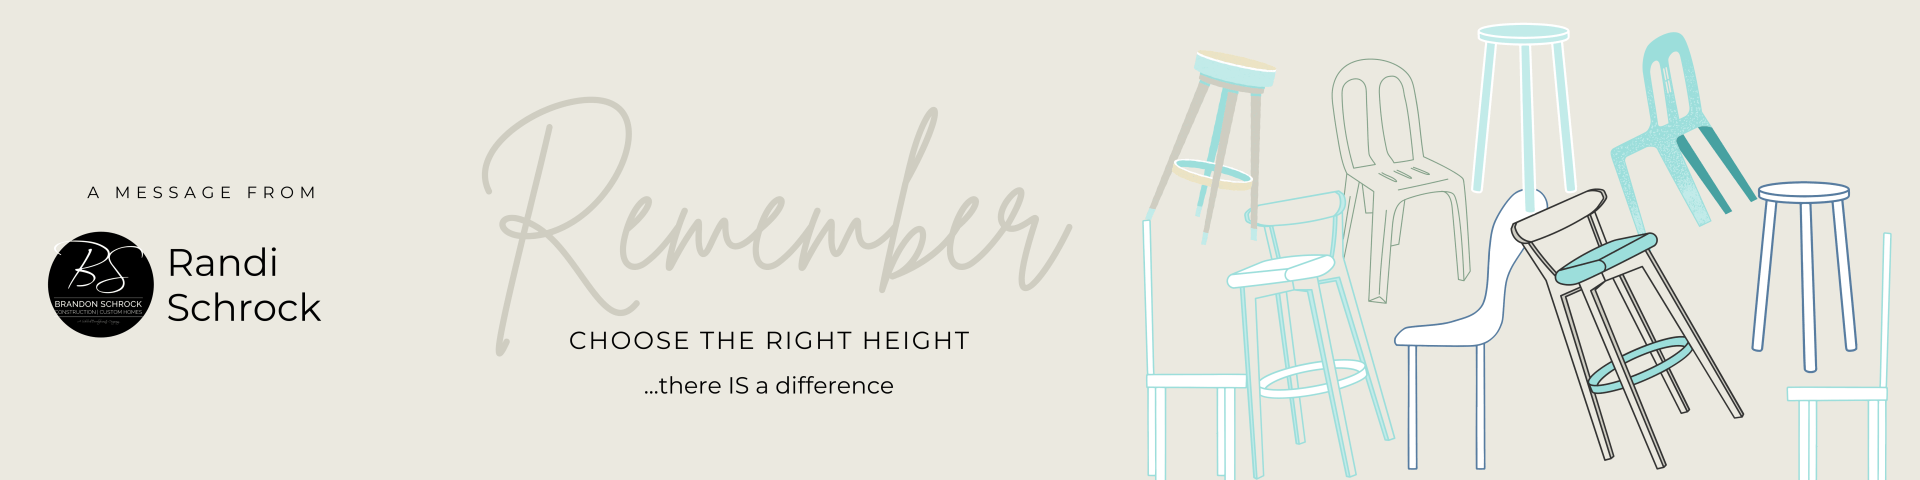 choose the right height